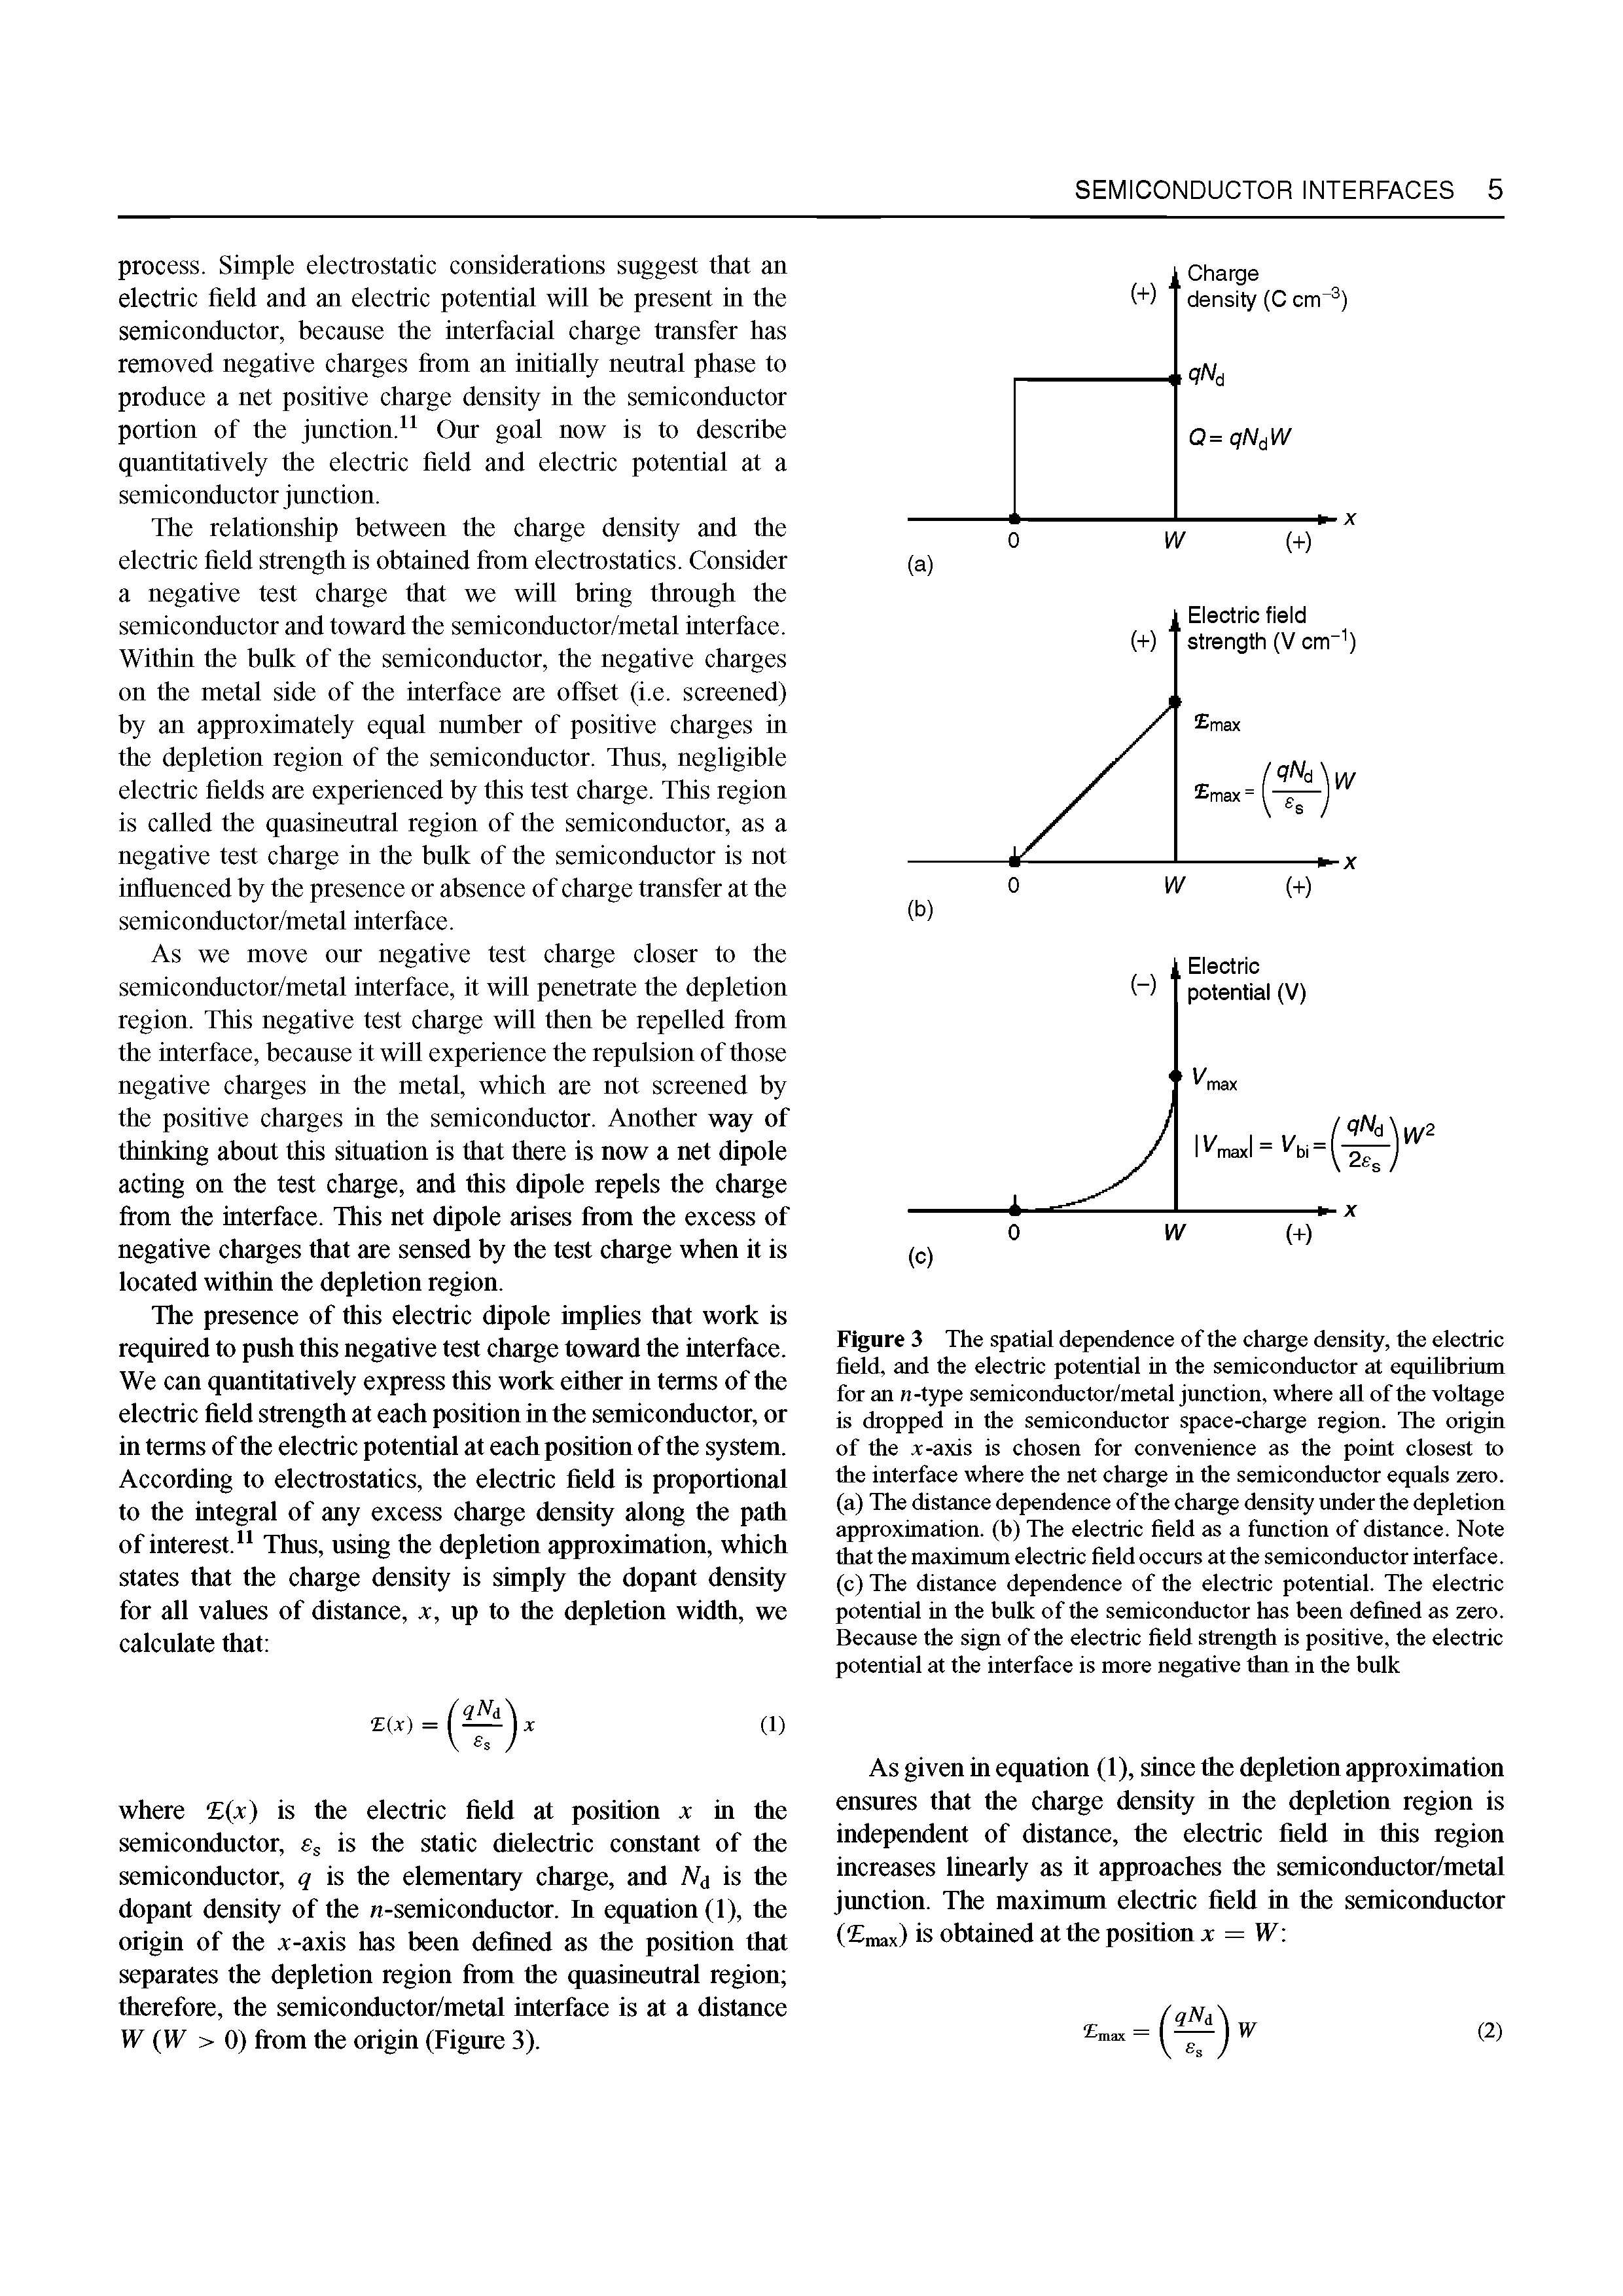 Figure 3 The spatial dependence of the charge density, the electric field, and the electric potential in the semiconductor at equihbrium for an n-type semiconductor/metal junction, where all of the voltage is dropped in the semiconductor space-charge region. The origin of the x-axis is chosen for convenience as the point closest to the interface where the net charge in the semiconductor equals zero, (a) The distance dependence of the charge density under the depletion approximation, (b) The electric field as a function of distance. Note that the maximum electric field occurs at the semiconductor interface, (c) The distance dependence of the electric potential. The electric potential in the bulk of the semiconductor has been defined as zero. Because the sign of the electric field strength is positive, the electric potential at the interface is more negative than in the bulk...